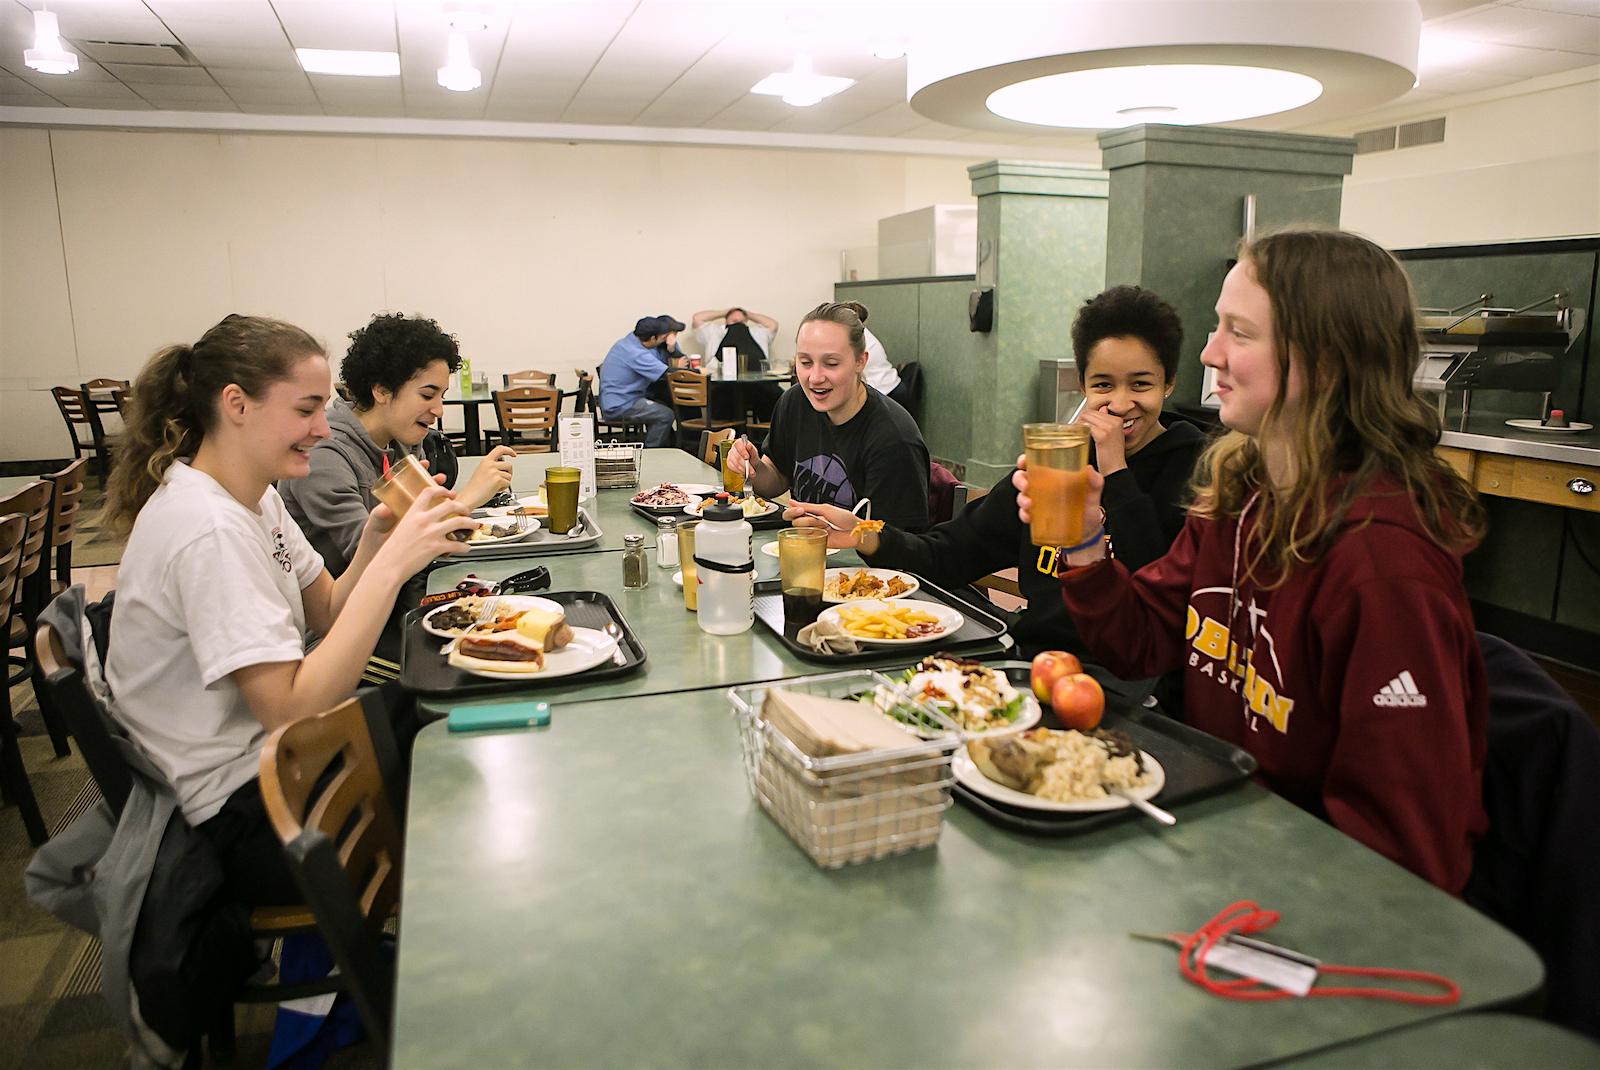 A group of friends enjoys a meal at a dining hall table